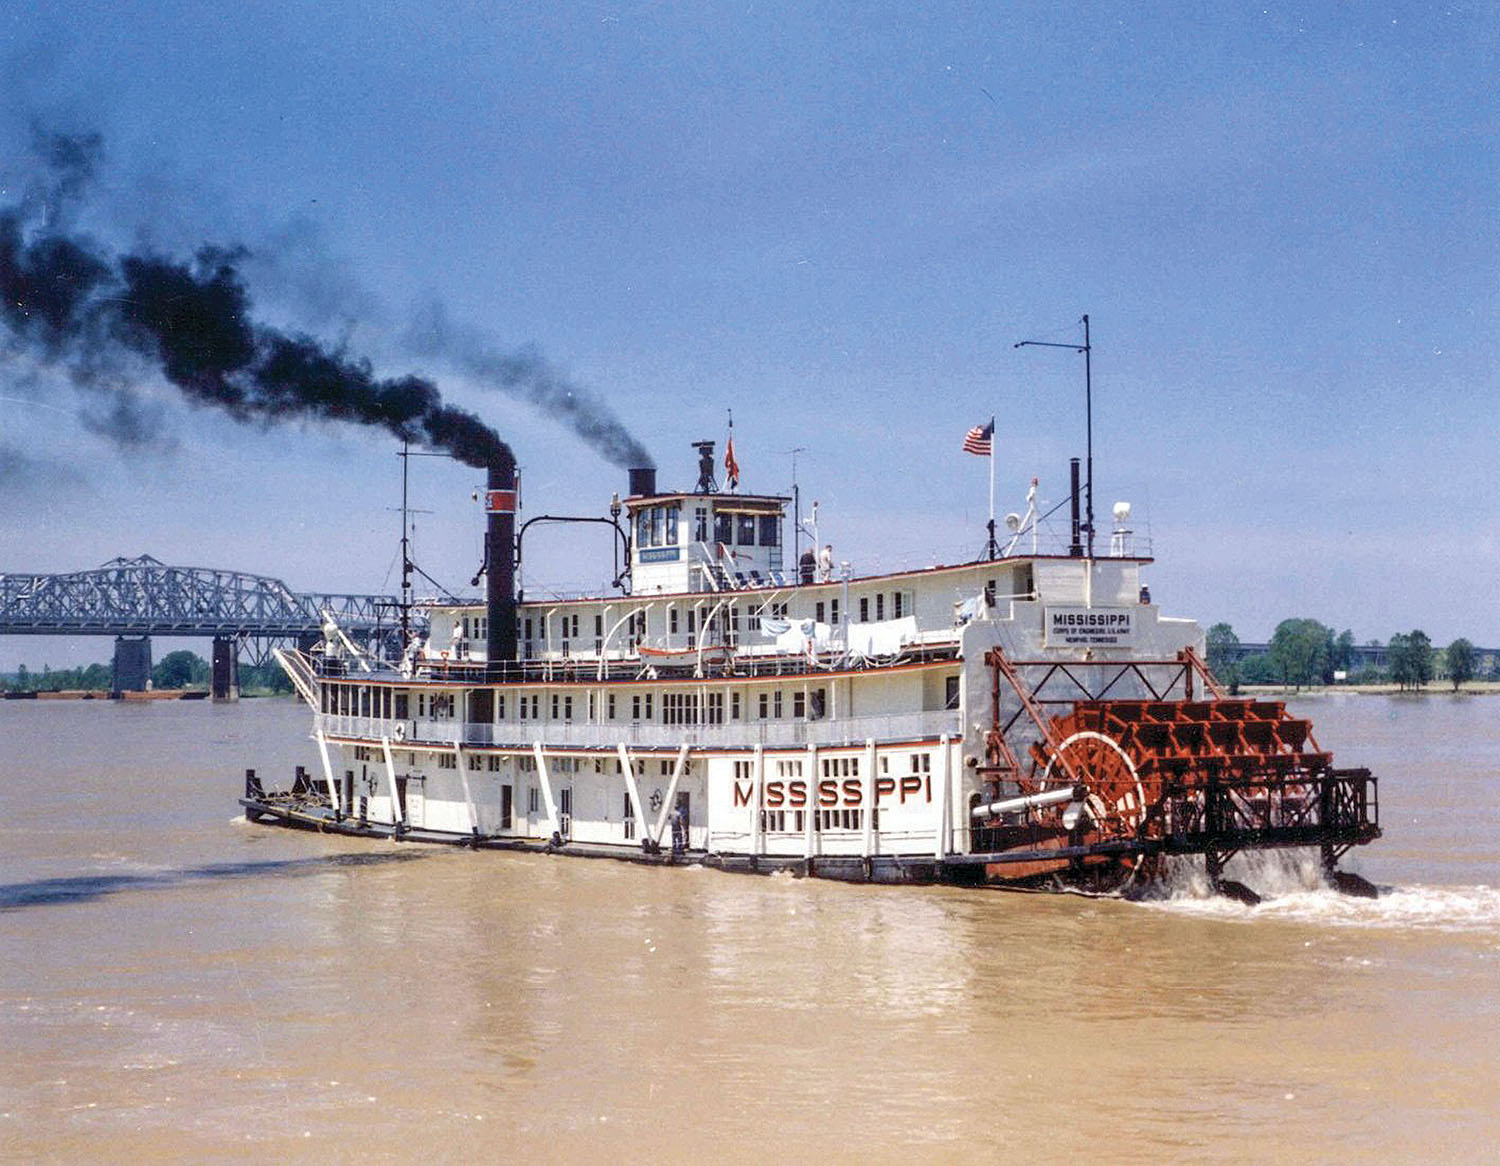 The pristine sternwheeler Mississippi III underway at Memphis. (Keith Norrington collection)